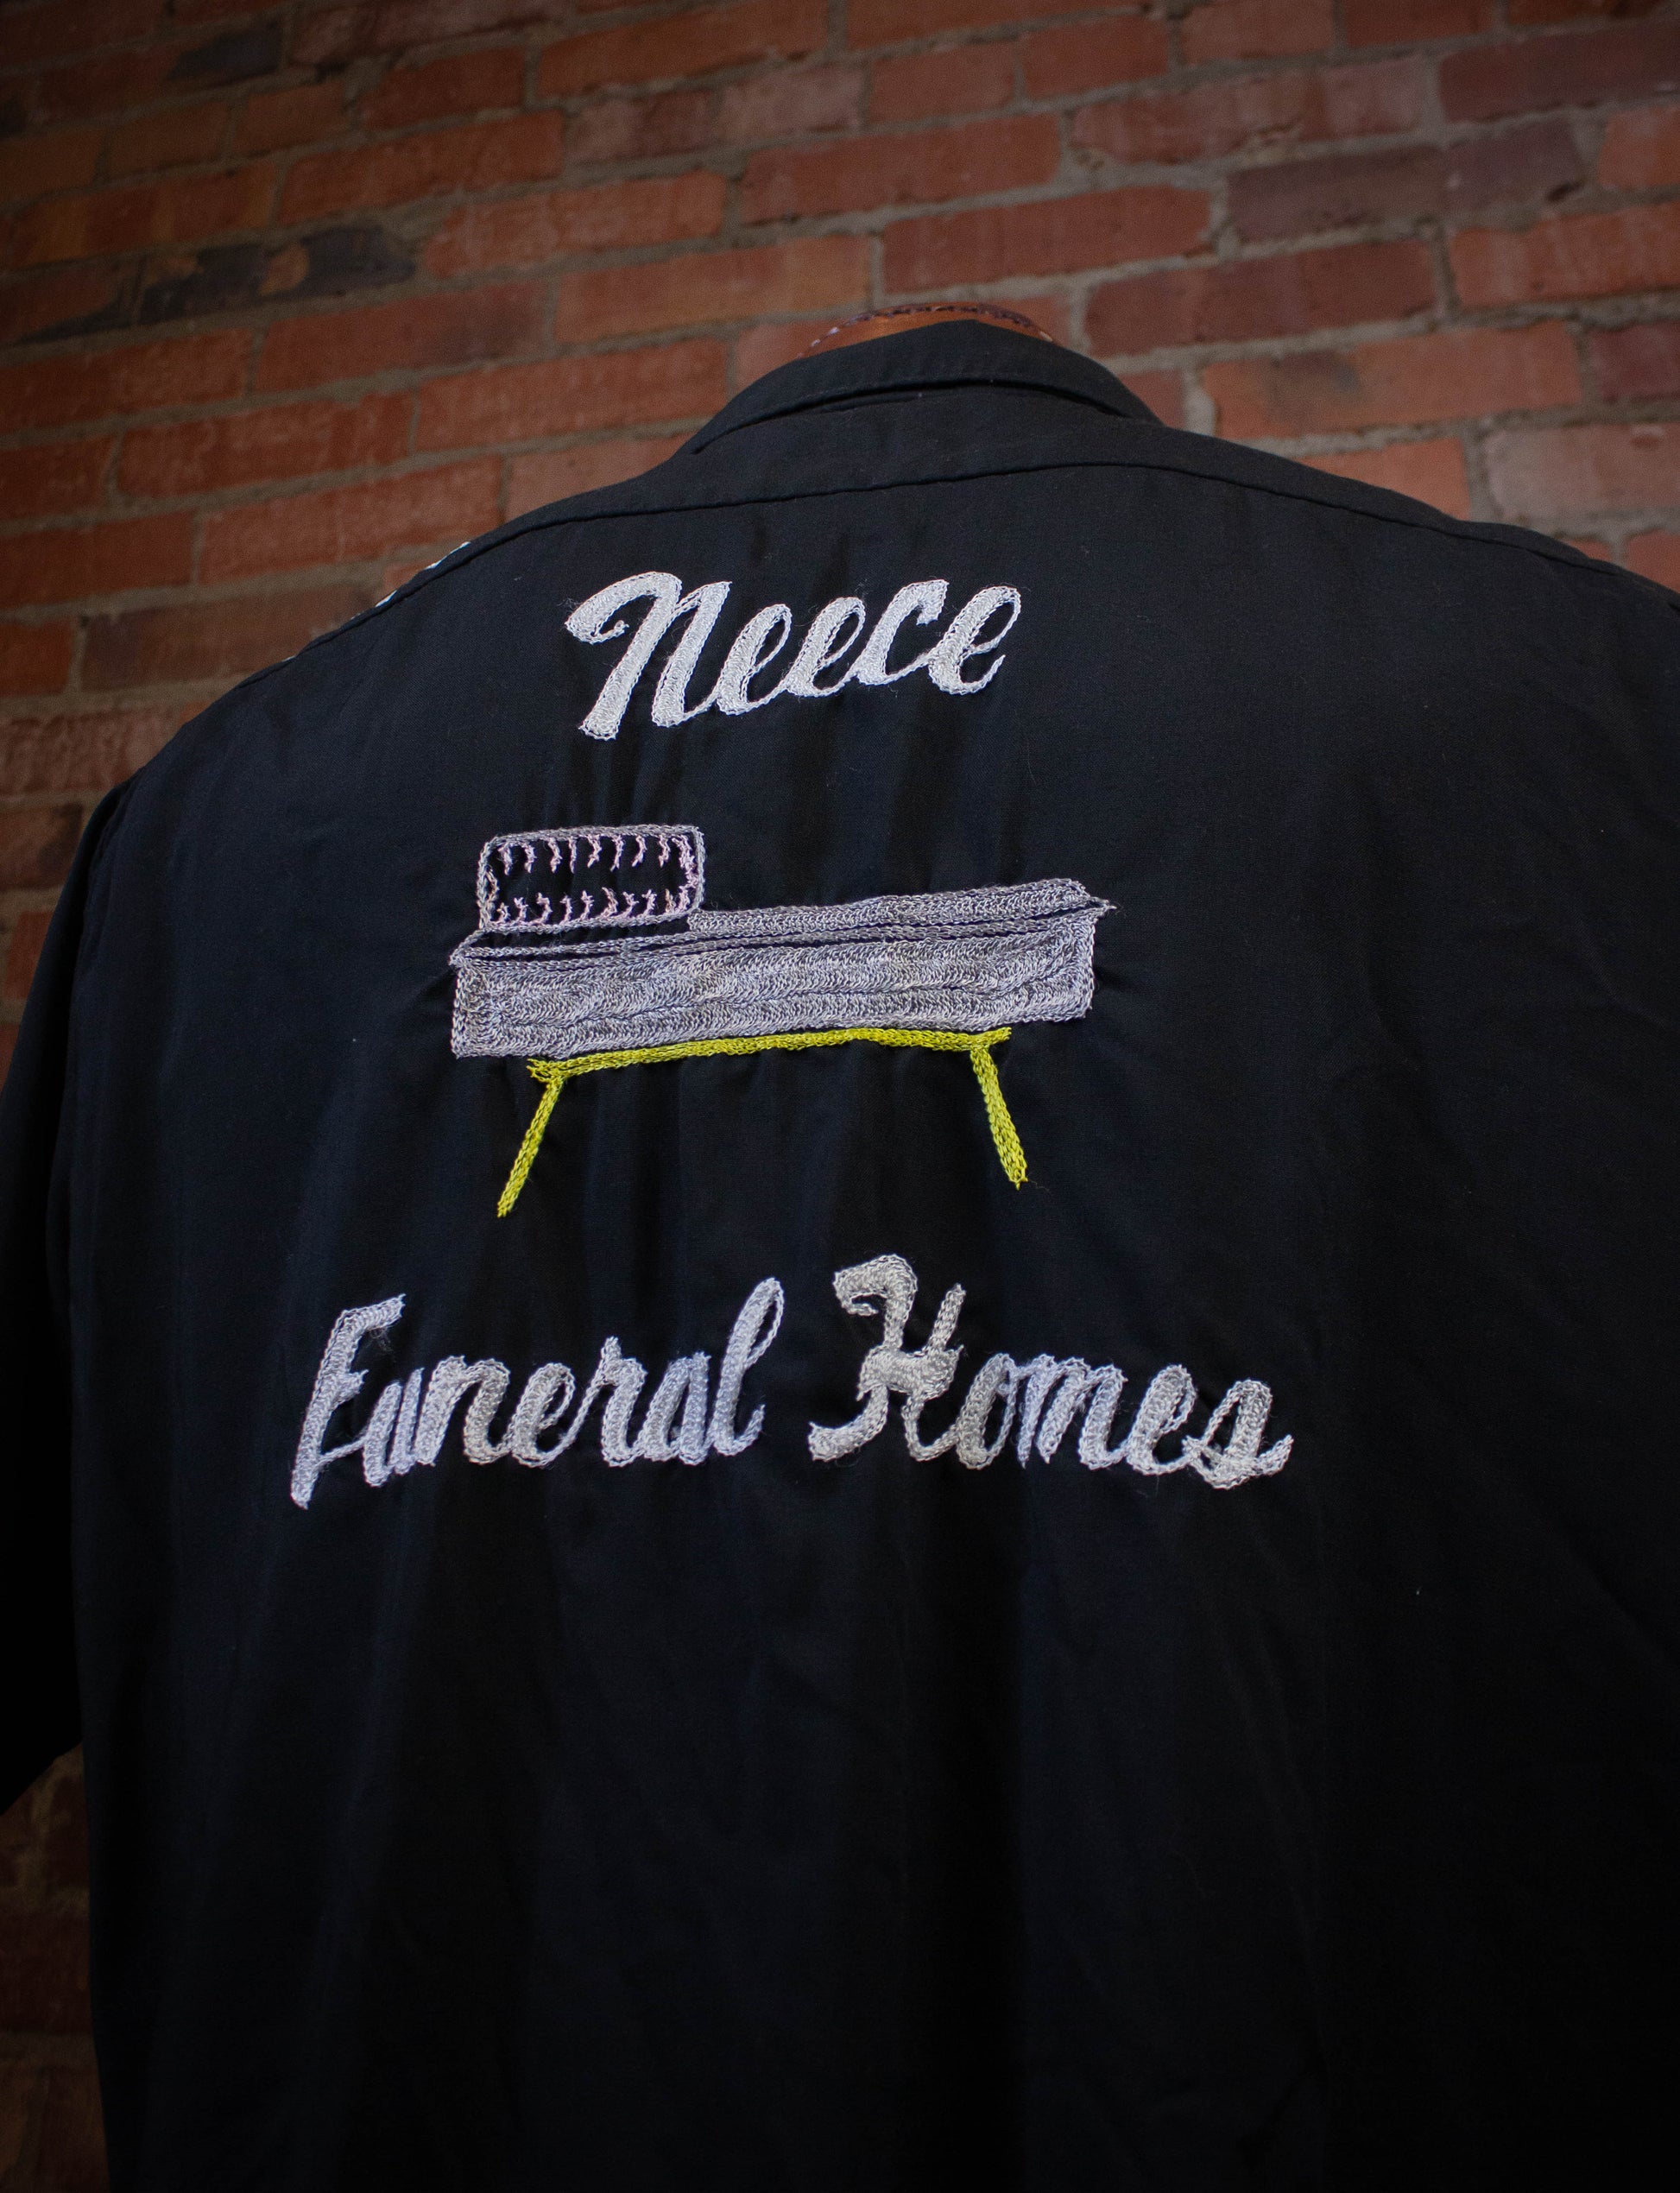 Vintage King Louie Neece Funeral Homes "Don" Chainstitch Bowling Shirt 50s Black XL